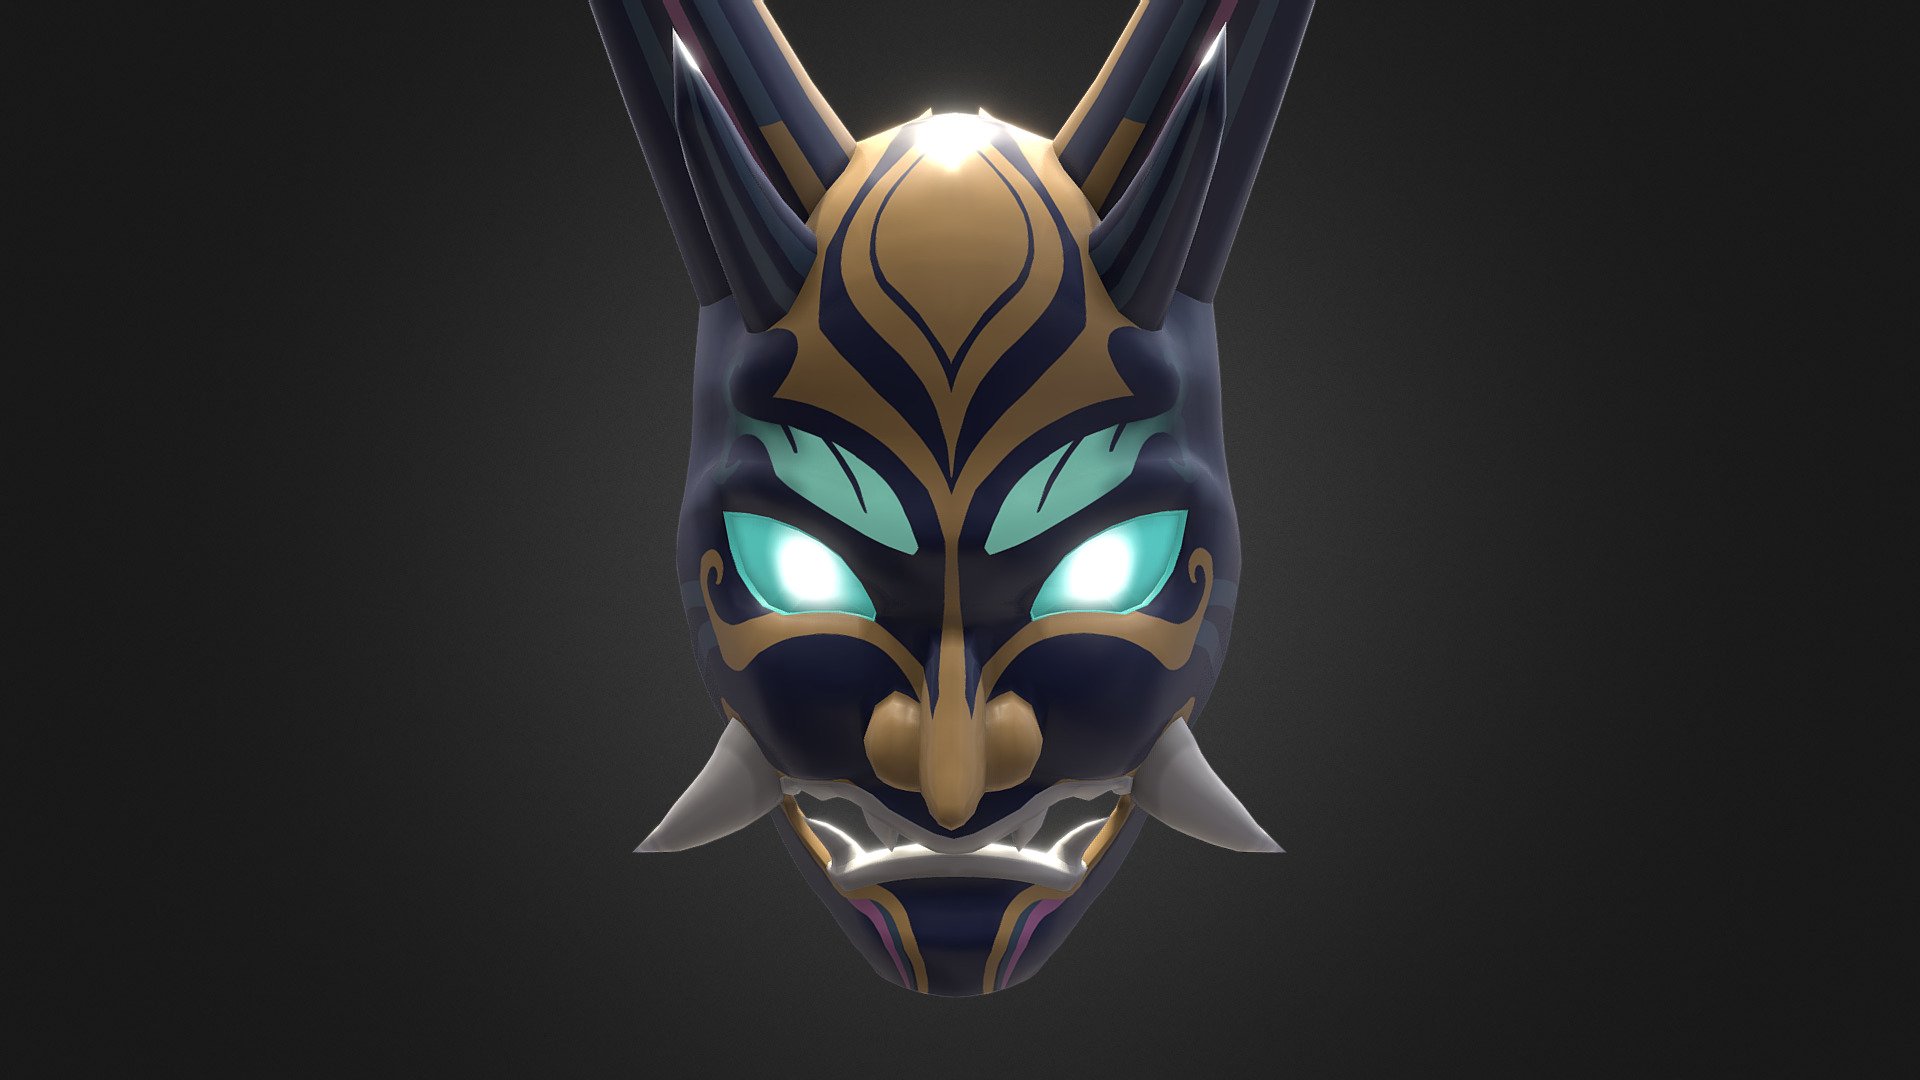 A fan made asset based on the demonic mask used by Xiao in the Genshin Impact game. 
Suitable for all game engines. Made in Blender and Substance Painter. Textures are in 4K resolution 3d model